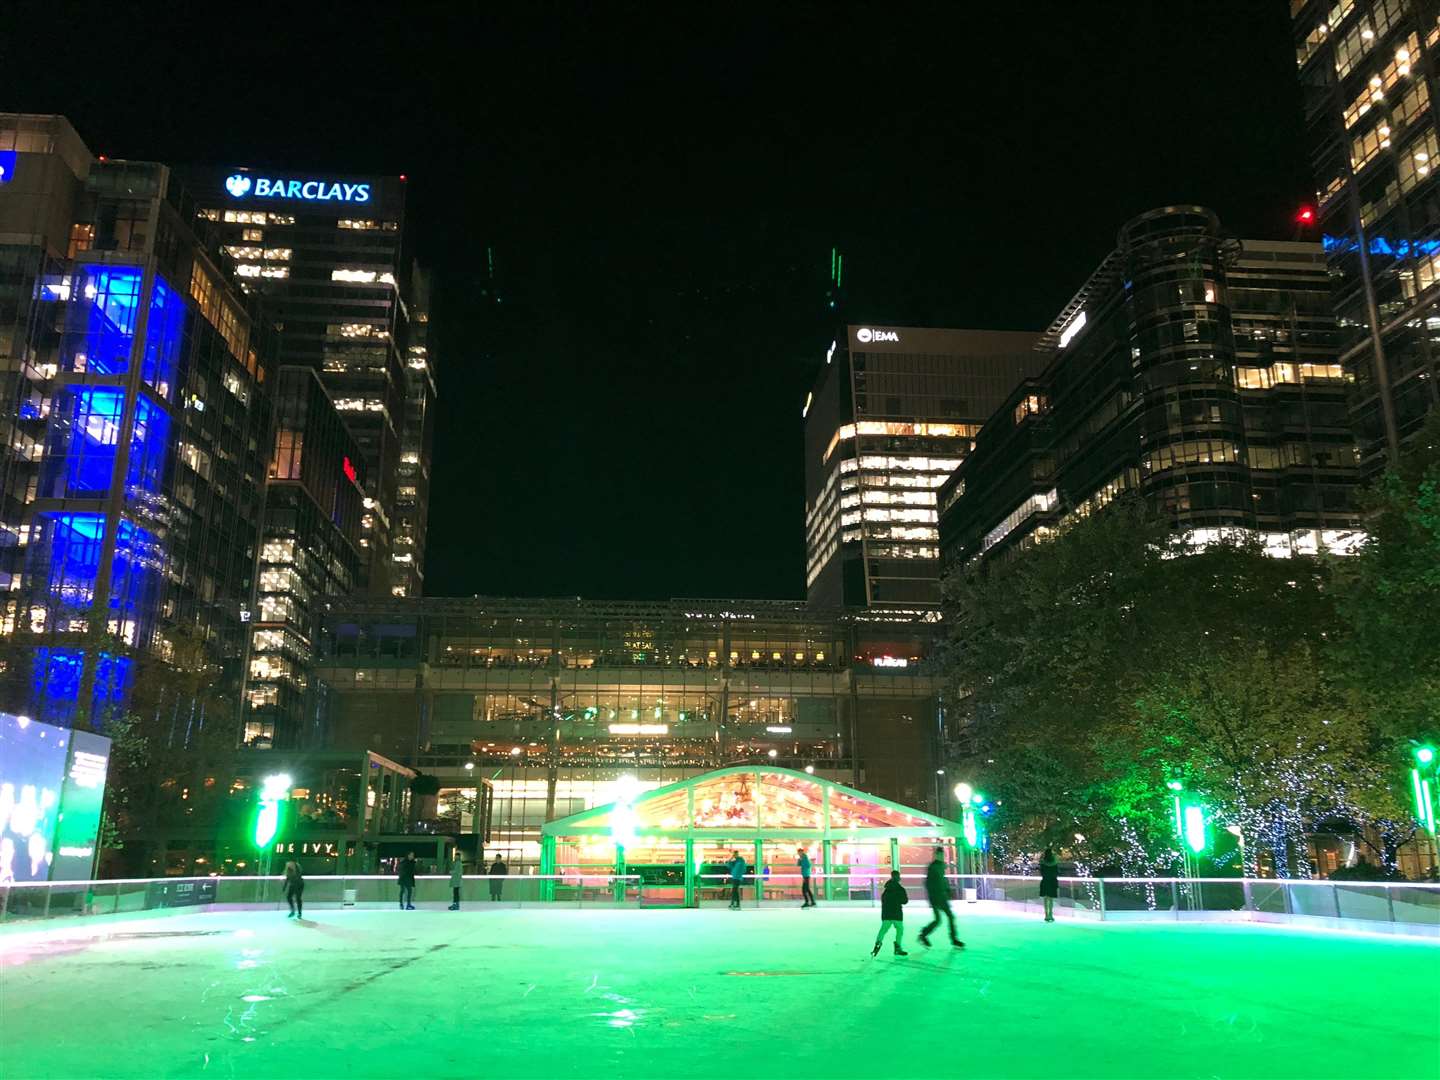 The ice rink itself changes colour (5185858)